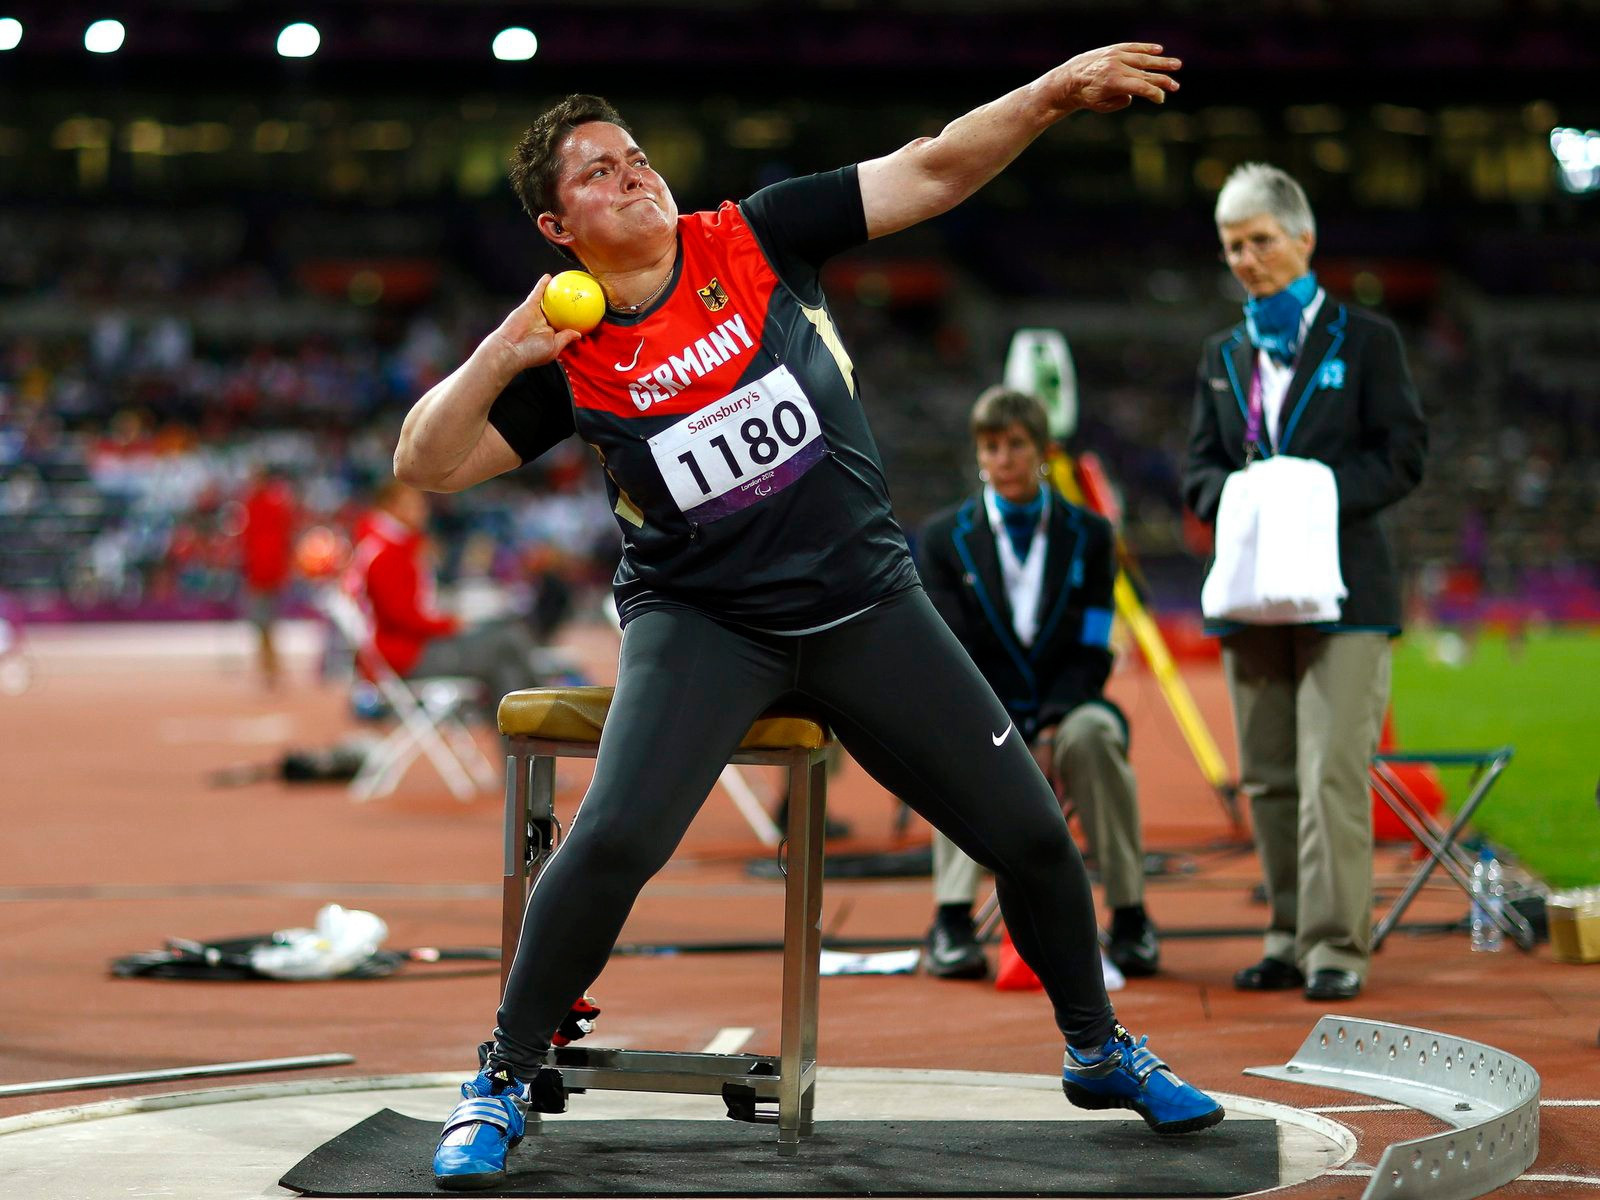 Birgit Kober will be among the top German athletes competing at next month's World Para Athletics European Championships in Berlin ©Getty Images